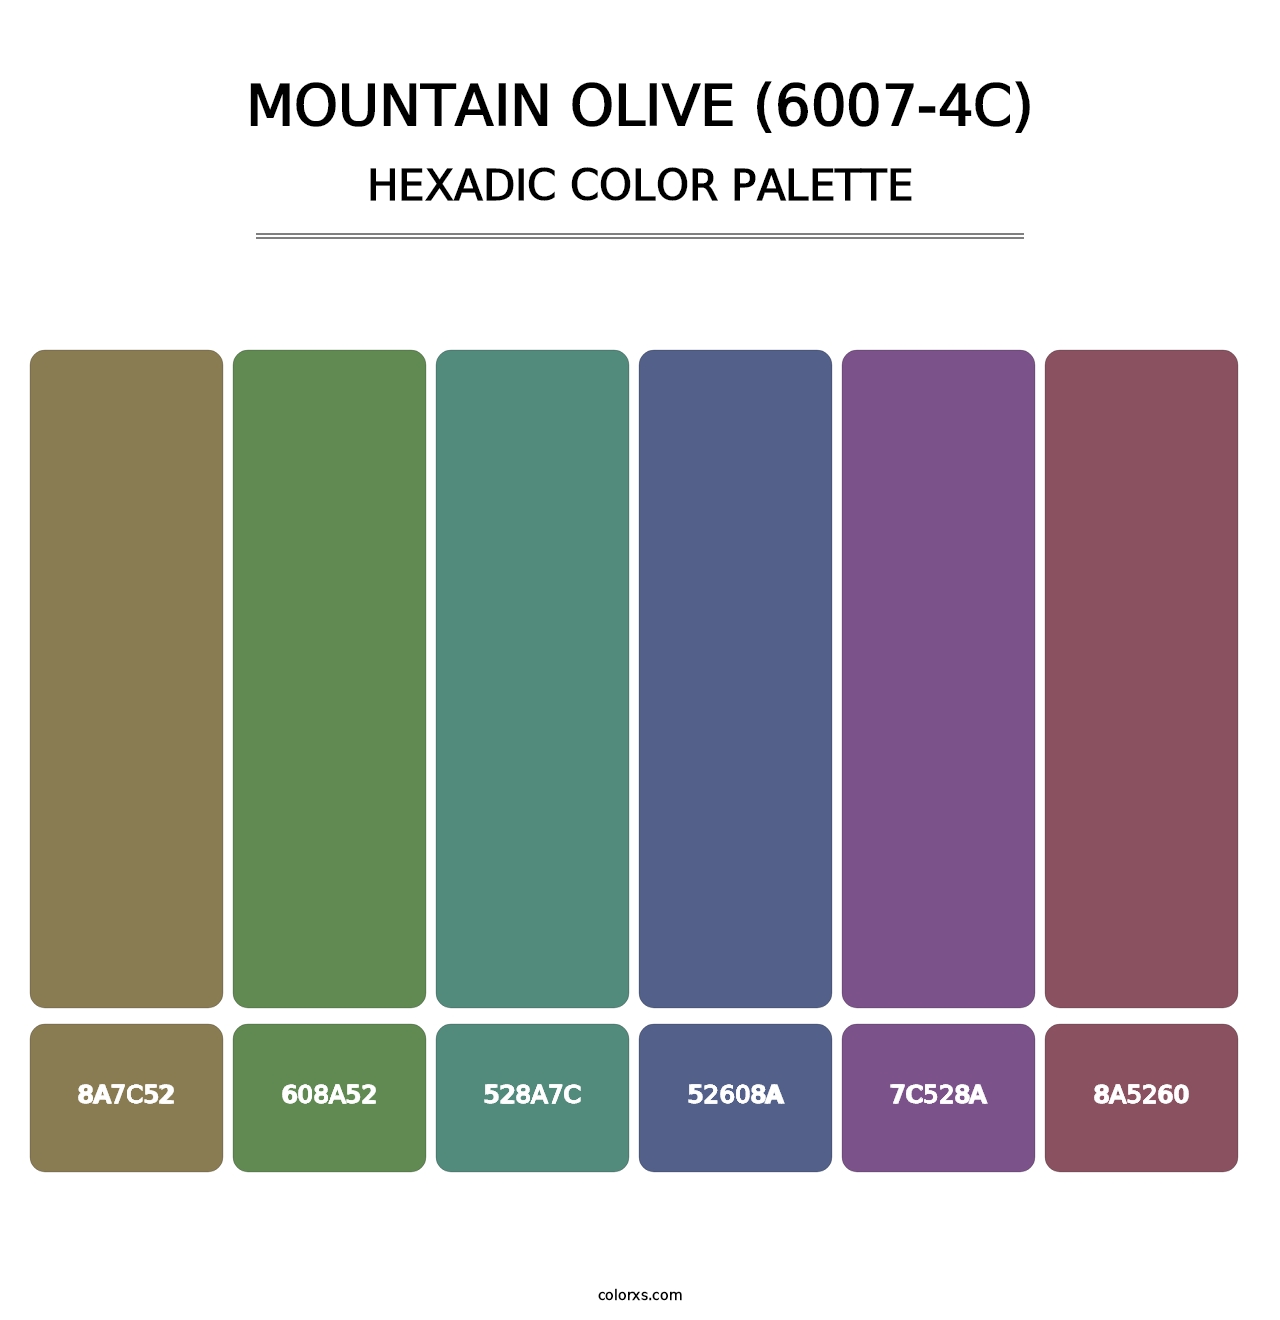 Mountain Olive (6007-4C) - Hexadic Color Palette